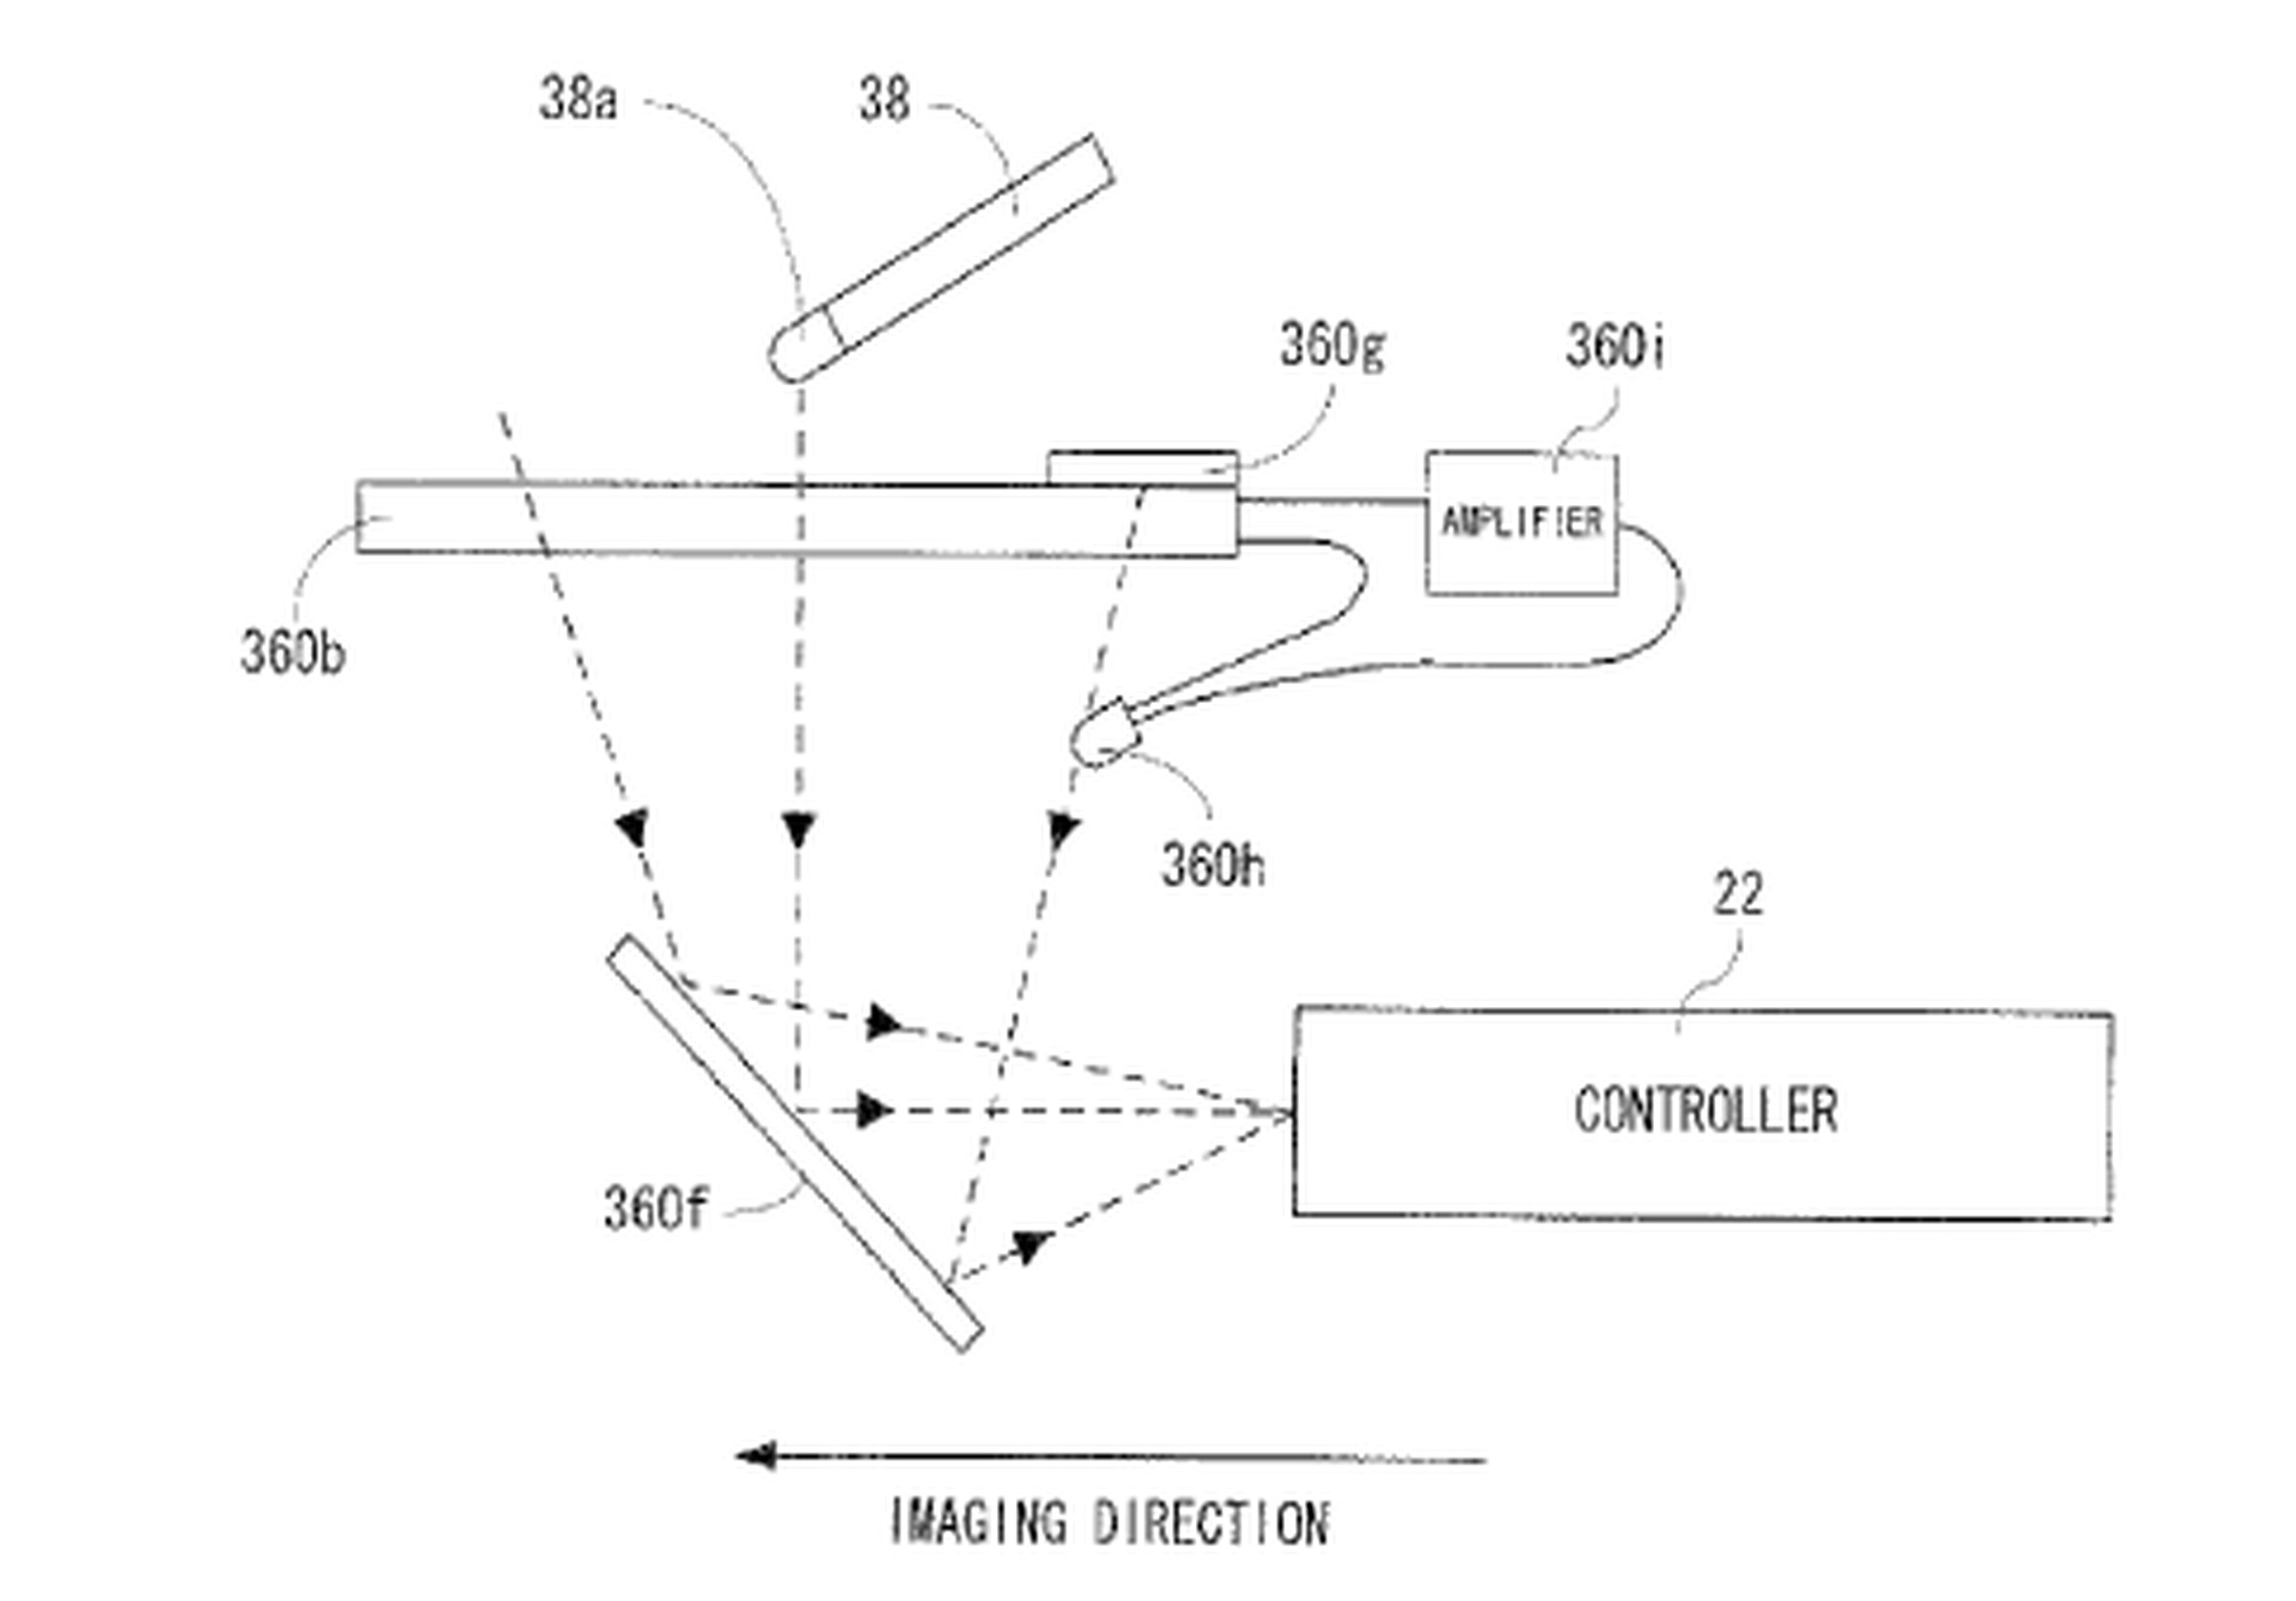 Wii Remote touch panel accessory patent diagrams